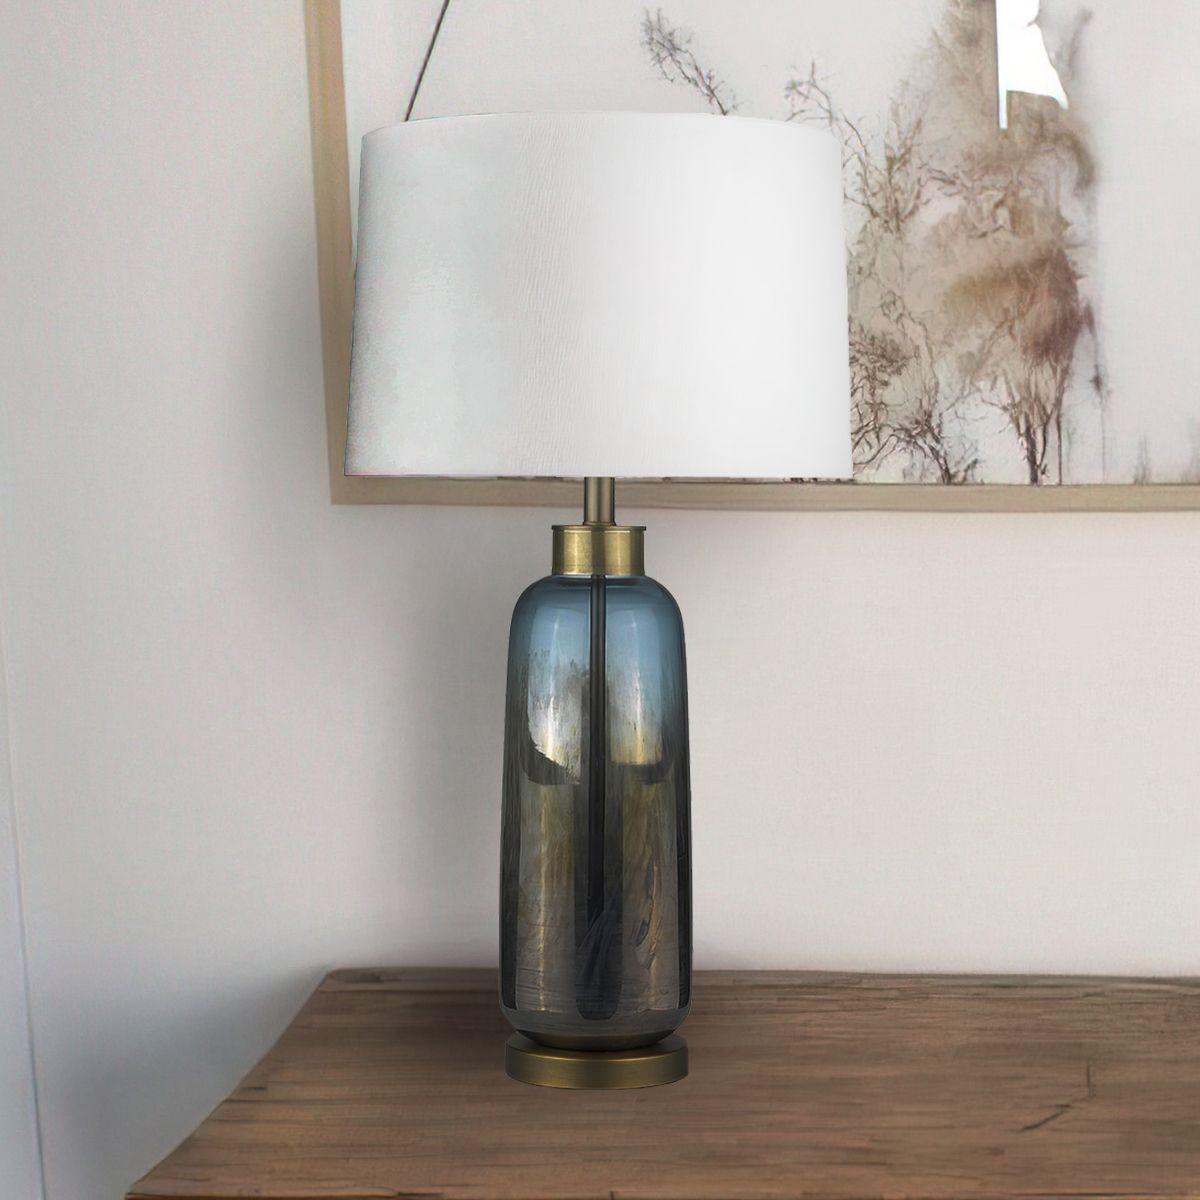 Trend Home 1 Light Table Lamp Blue/Brown Glass Body and Brass Accents